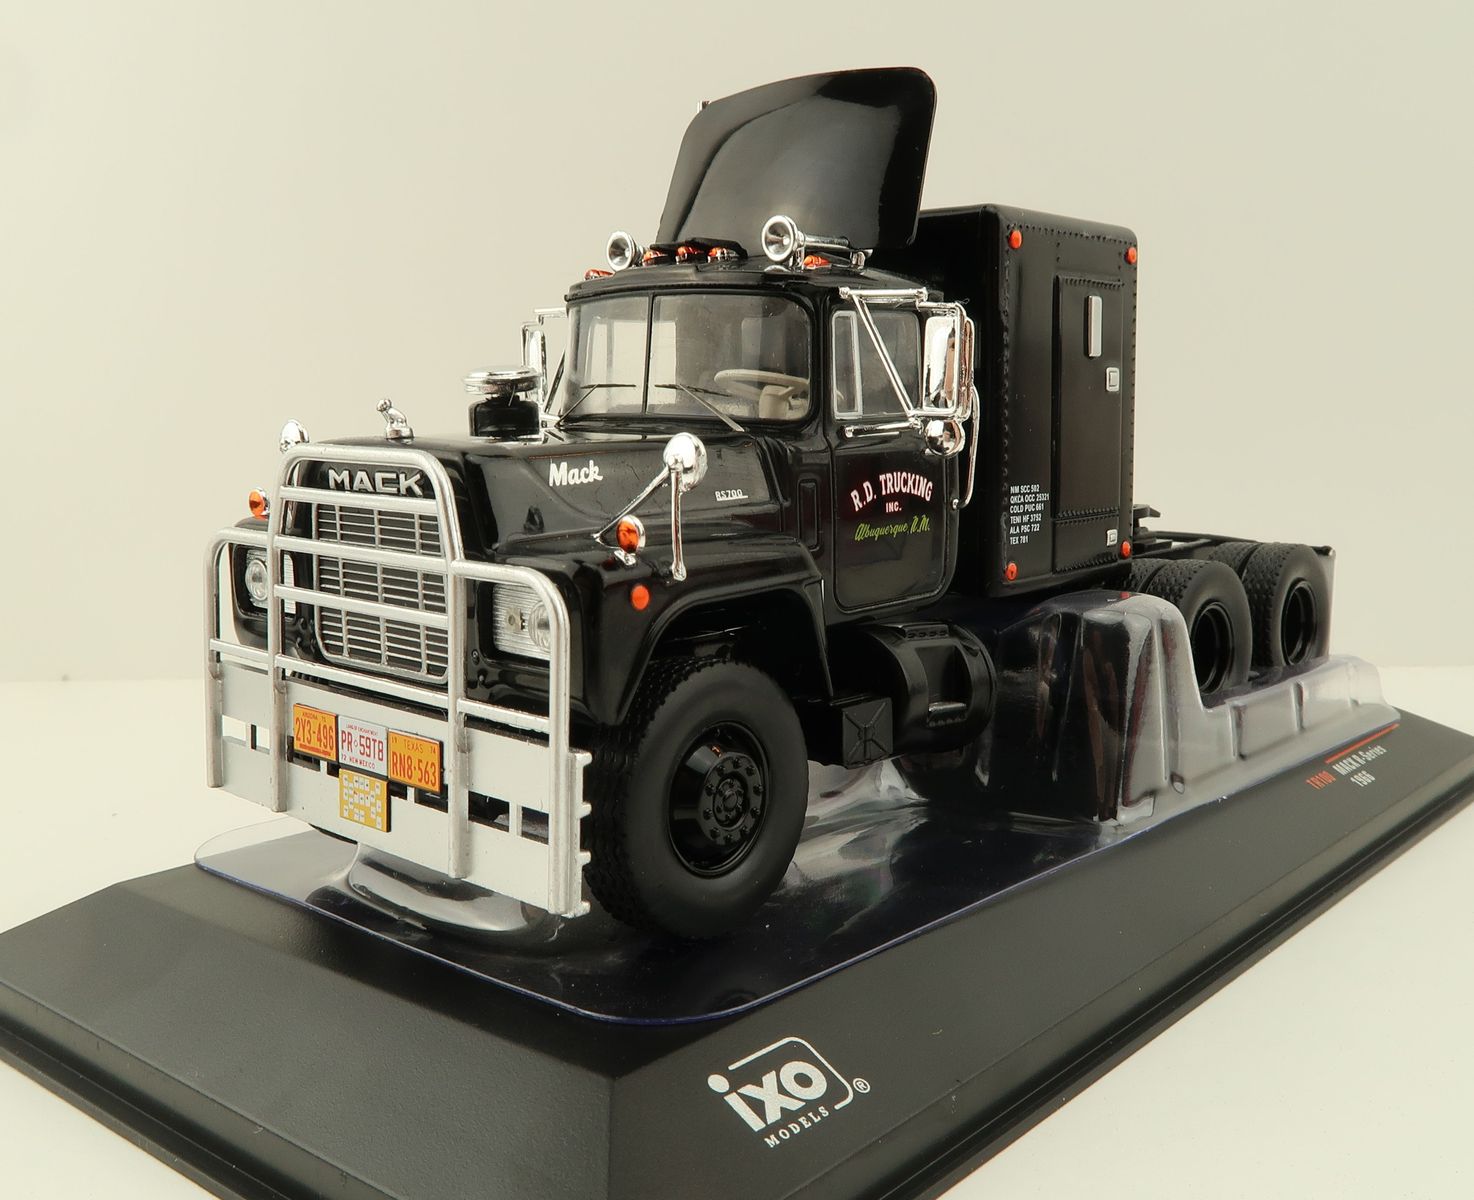 Product Image - IXO - Mack R-Series 6x4 Prime Mover R.D. Trucking Rubber Ducky Movie Convoy - Scale 1:43